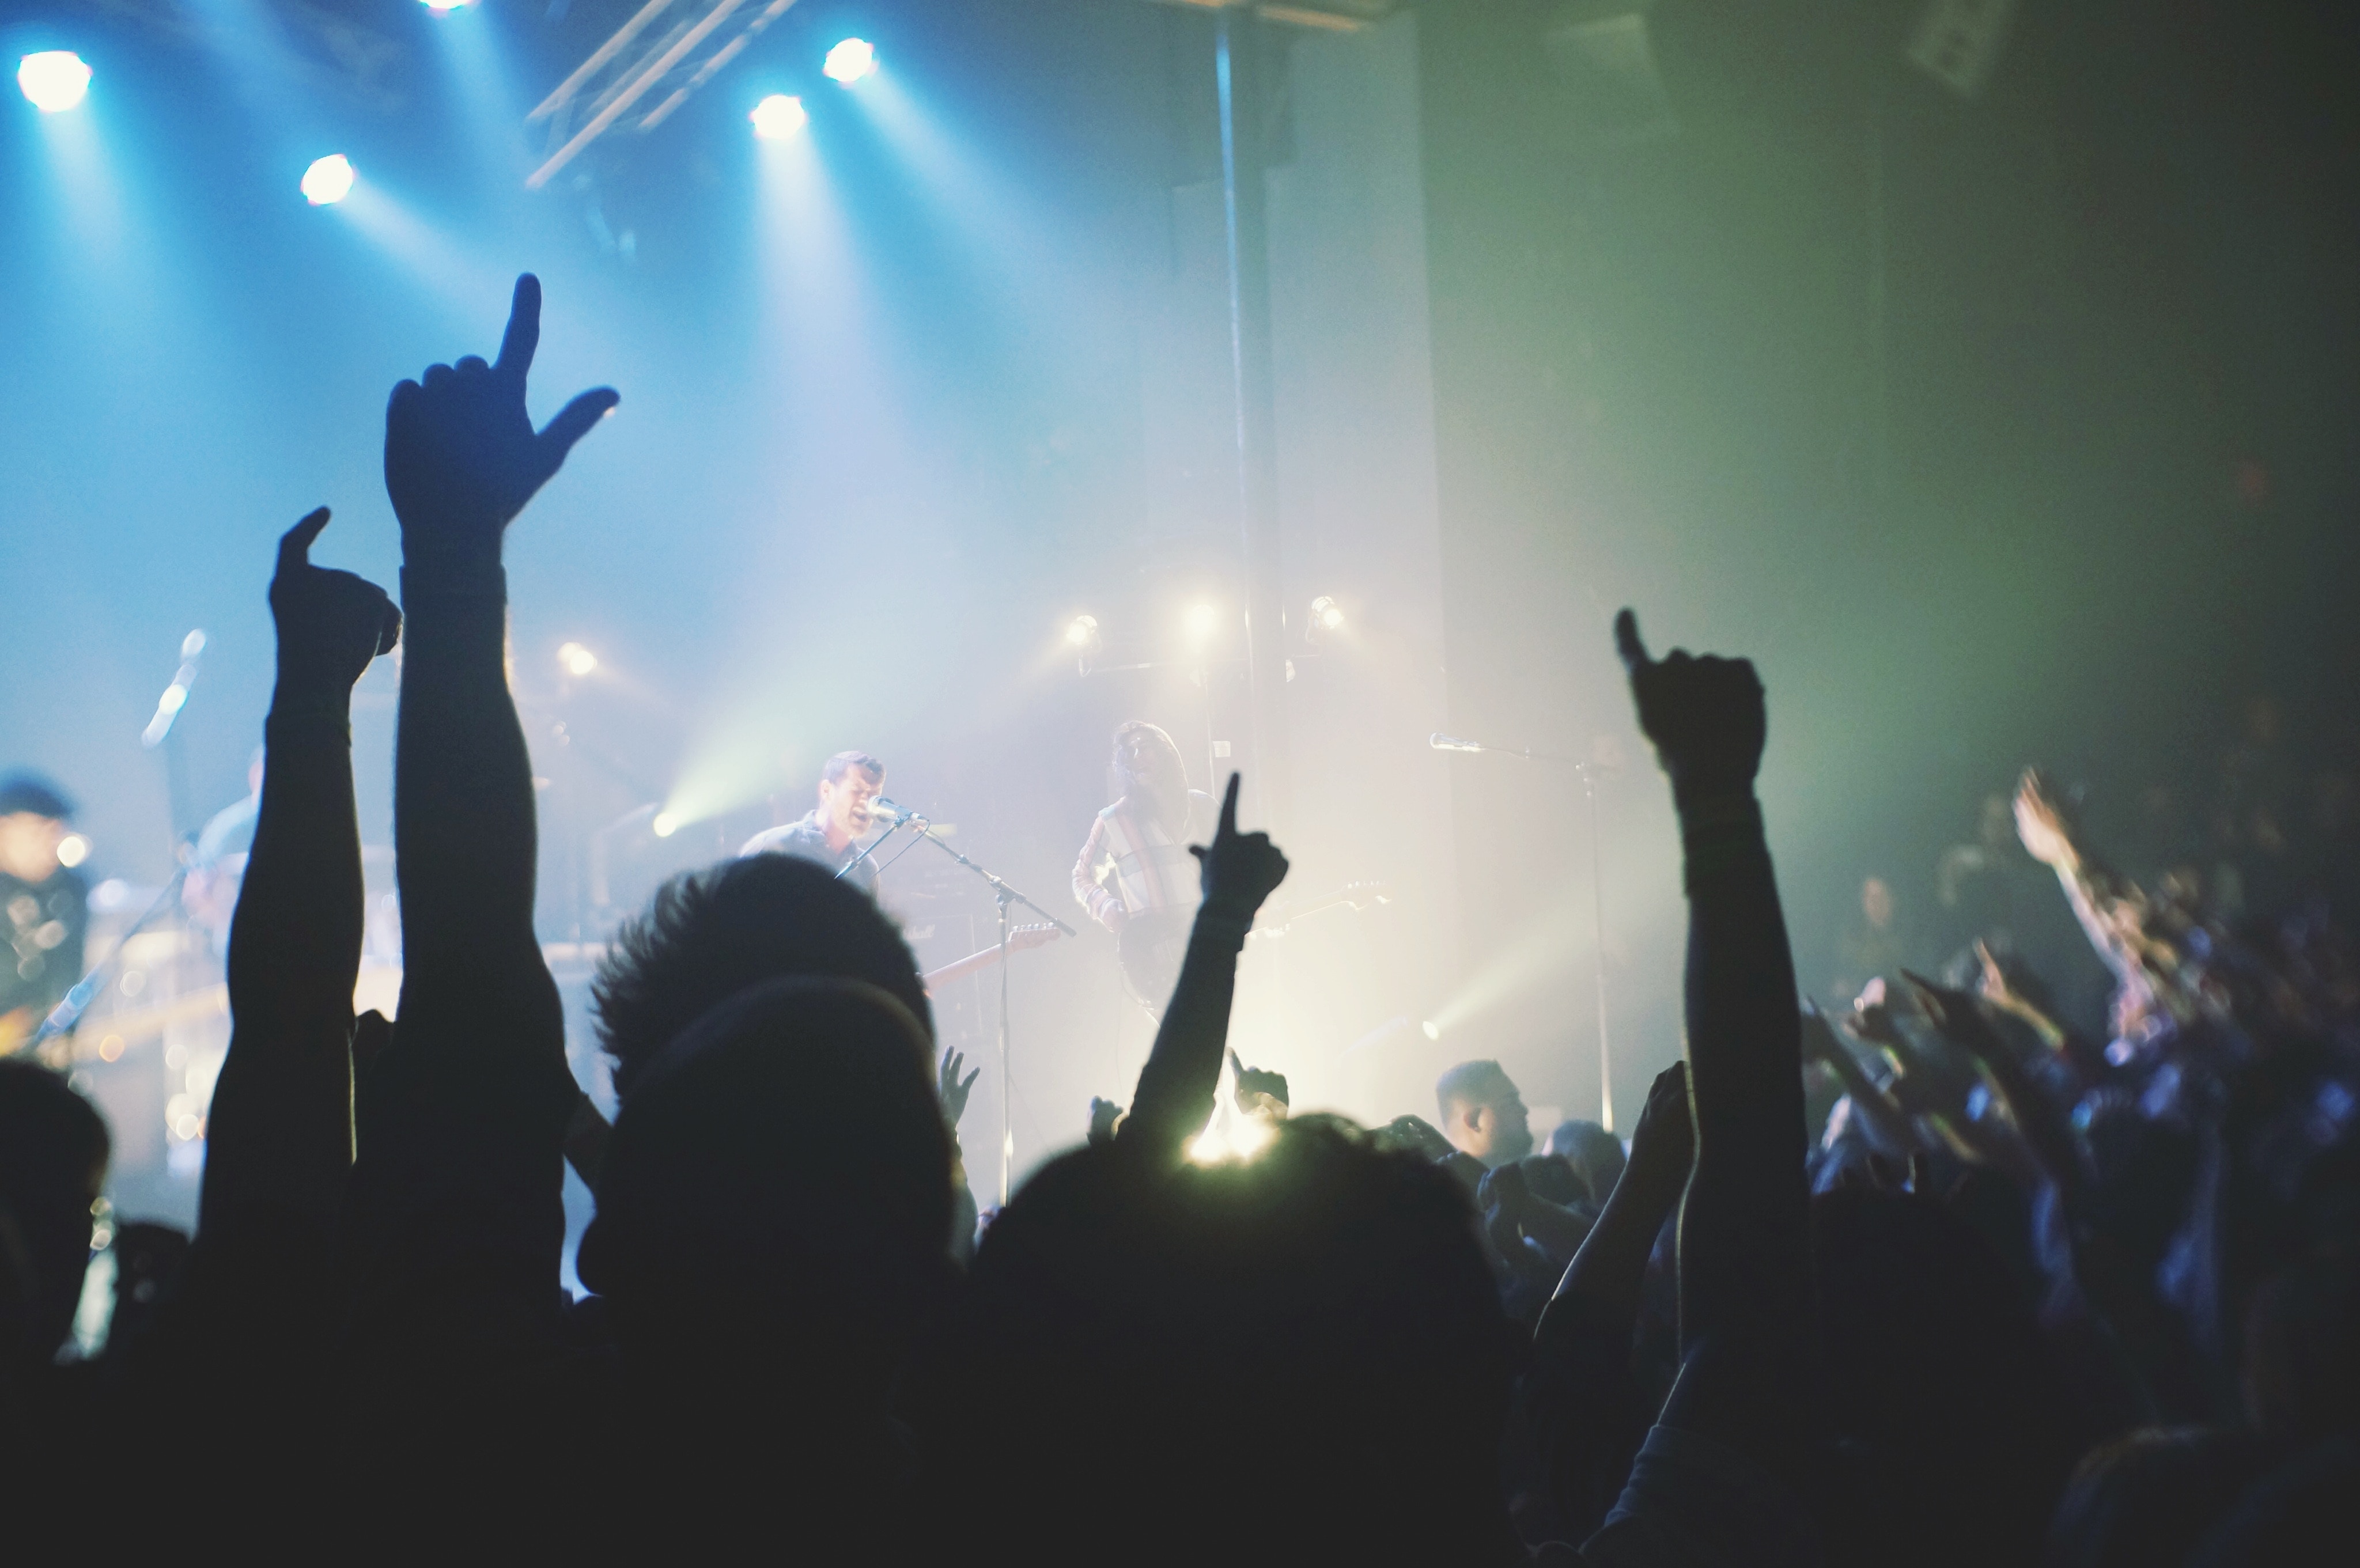 © Desi Mendoza, Hands uo in the air at a rock concert, BY-SA CC 0.0